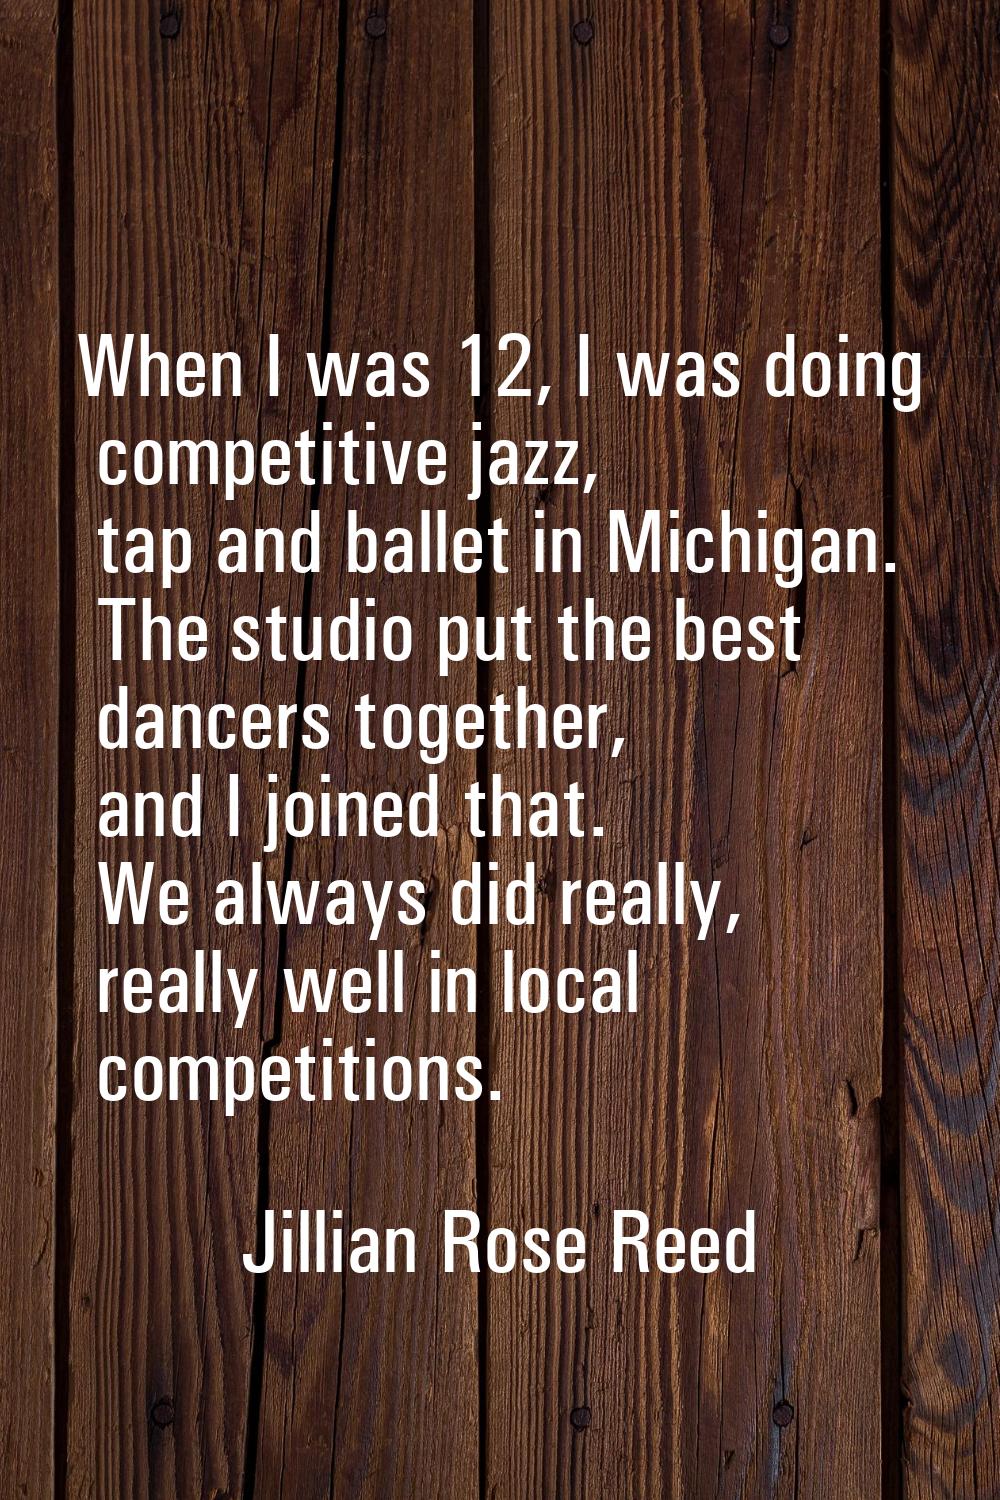 When I was 12, I was doing competitive jazz, tap and ballet in Michigan. The studio put the best da